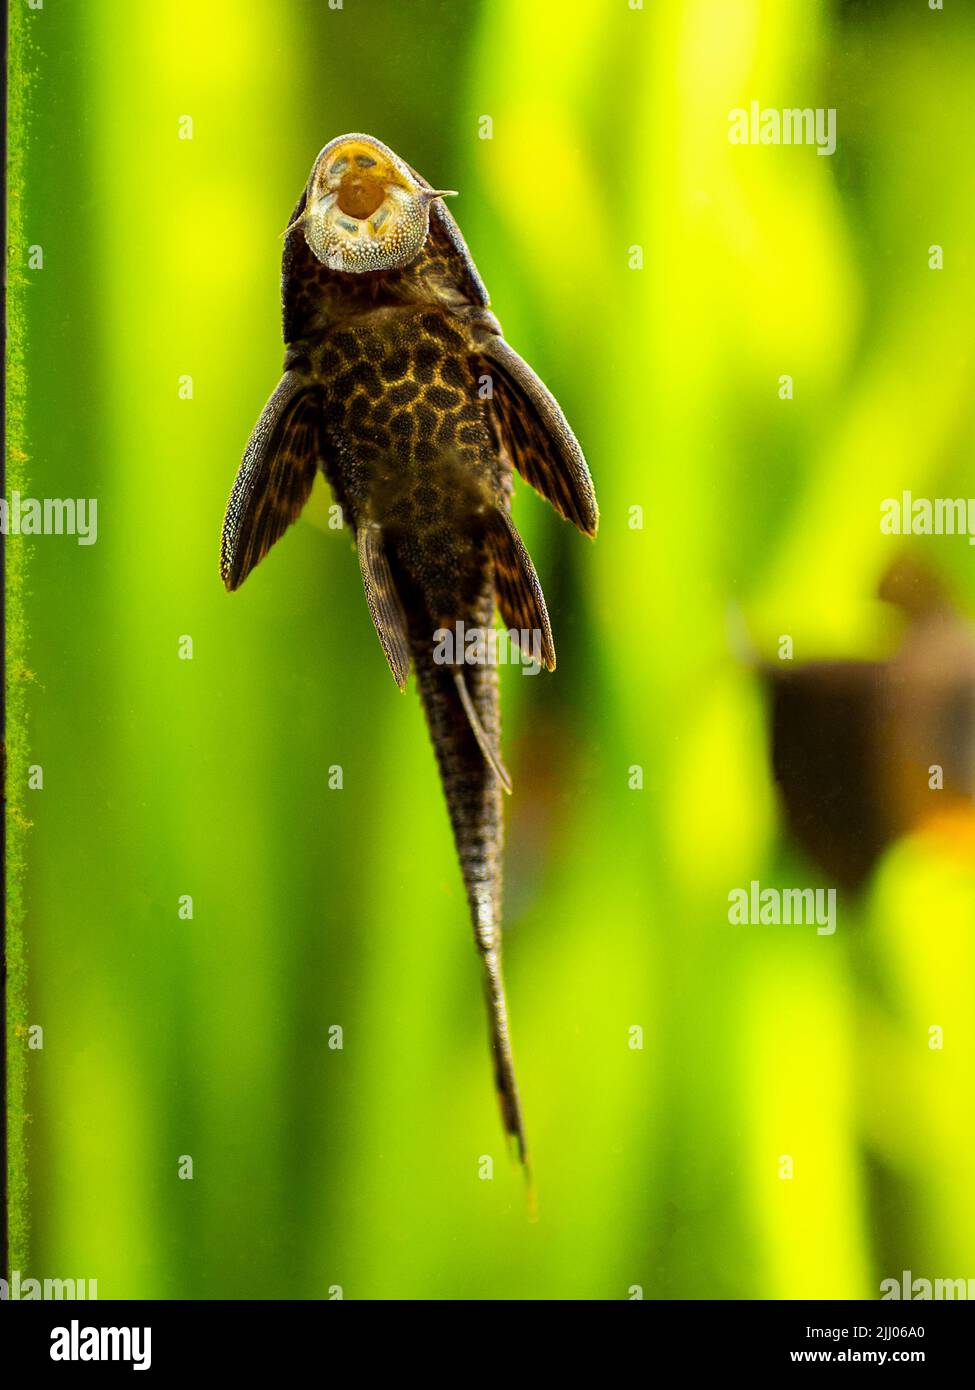 suckermouth catfish or common pleco (Hypostomus plecostomus) eating on the aquarium glass with blurred background Stock Photo